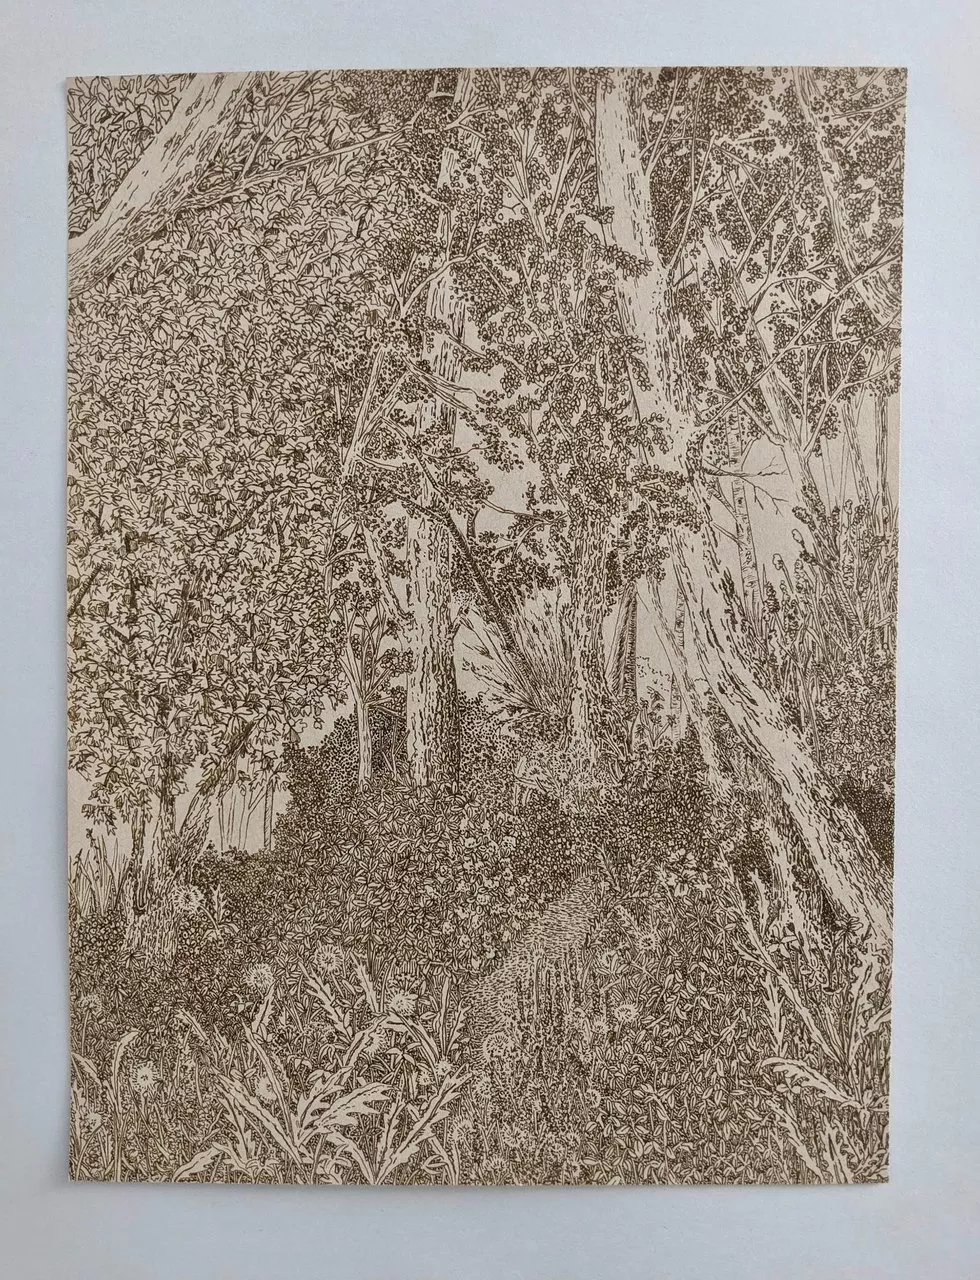 Image of a pencil drawing of a wooded area 